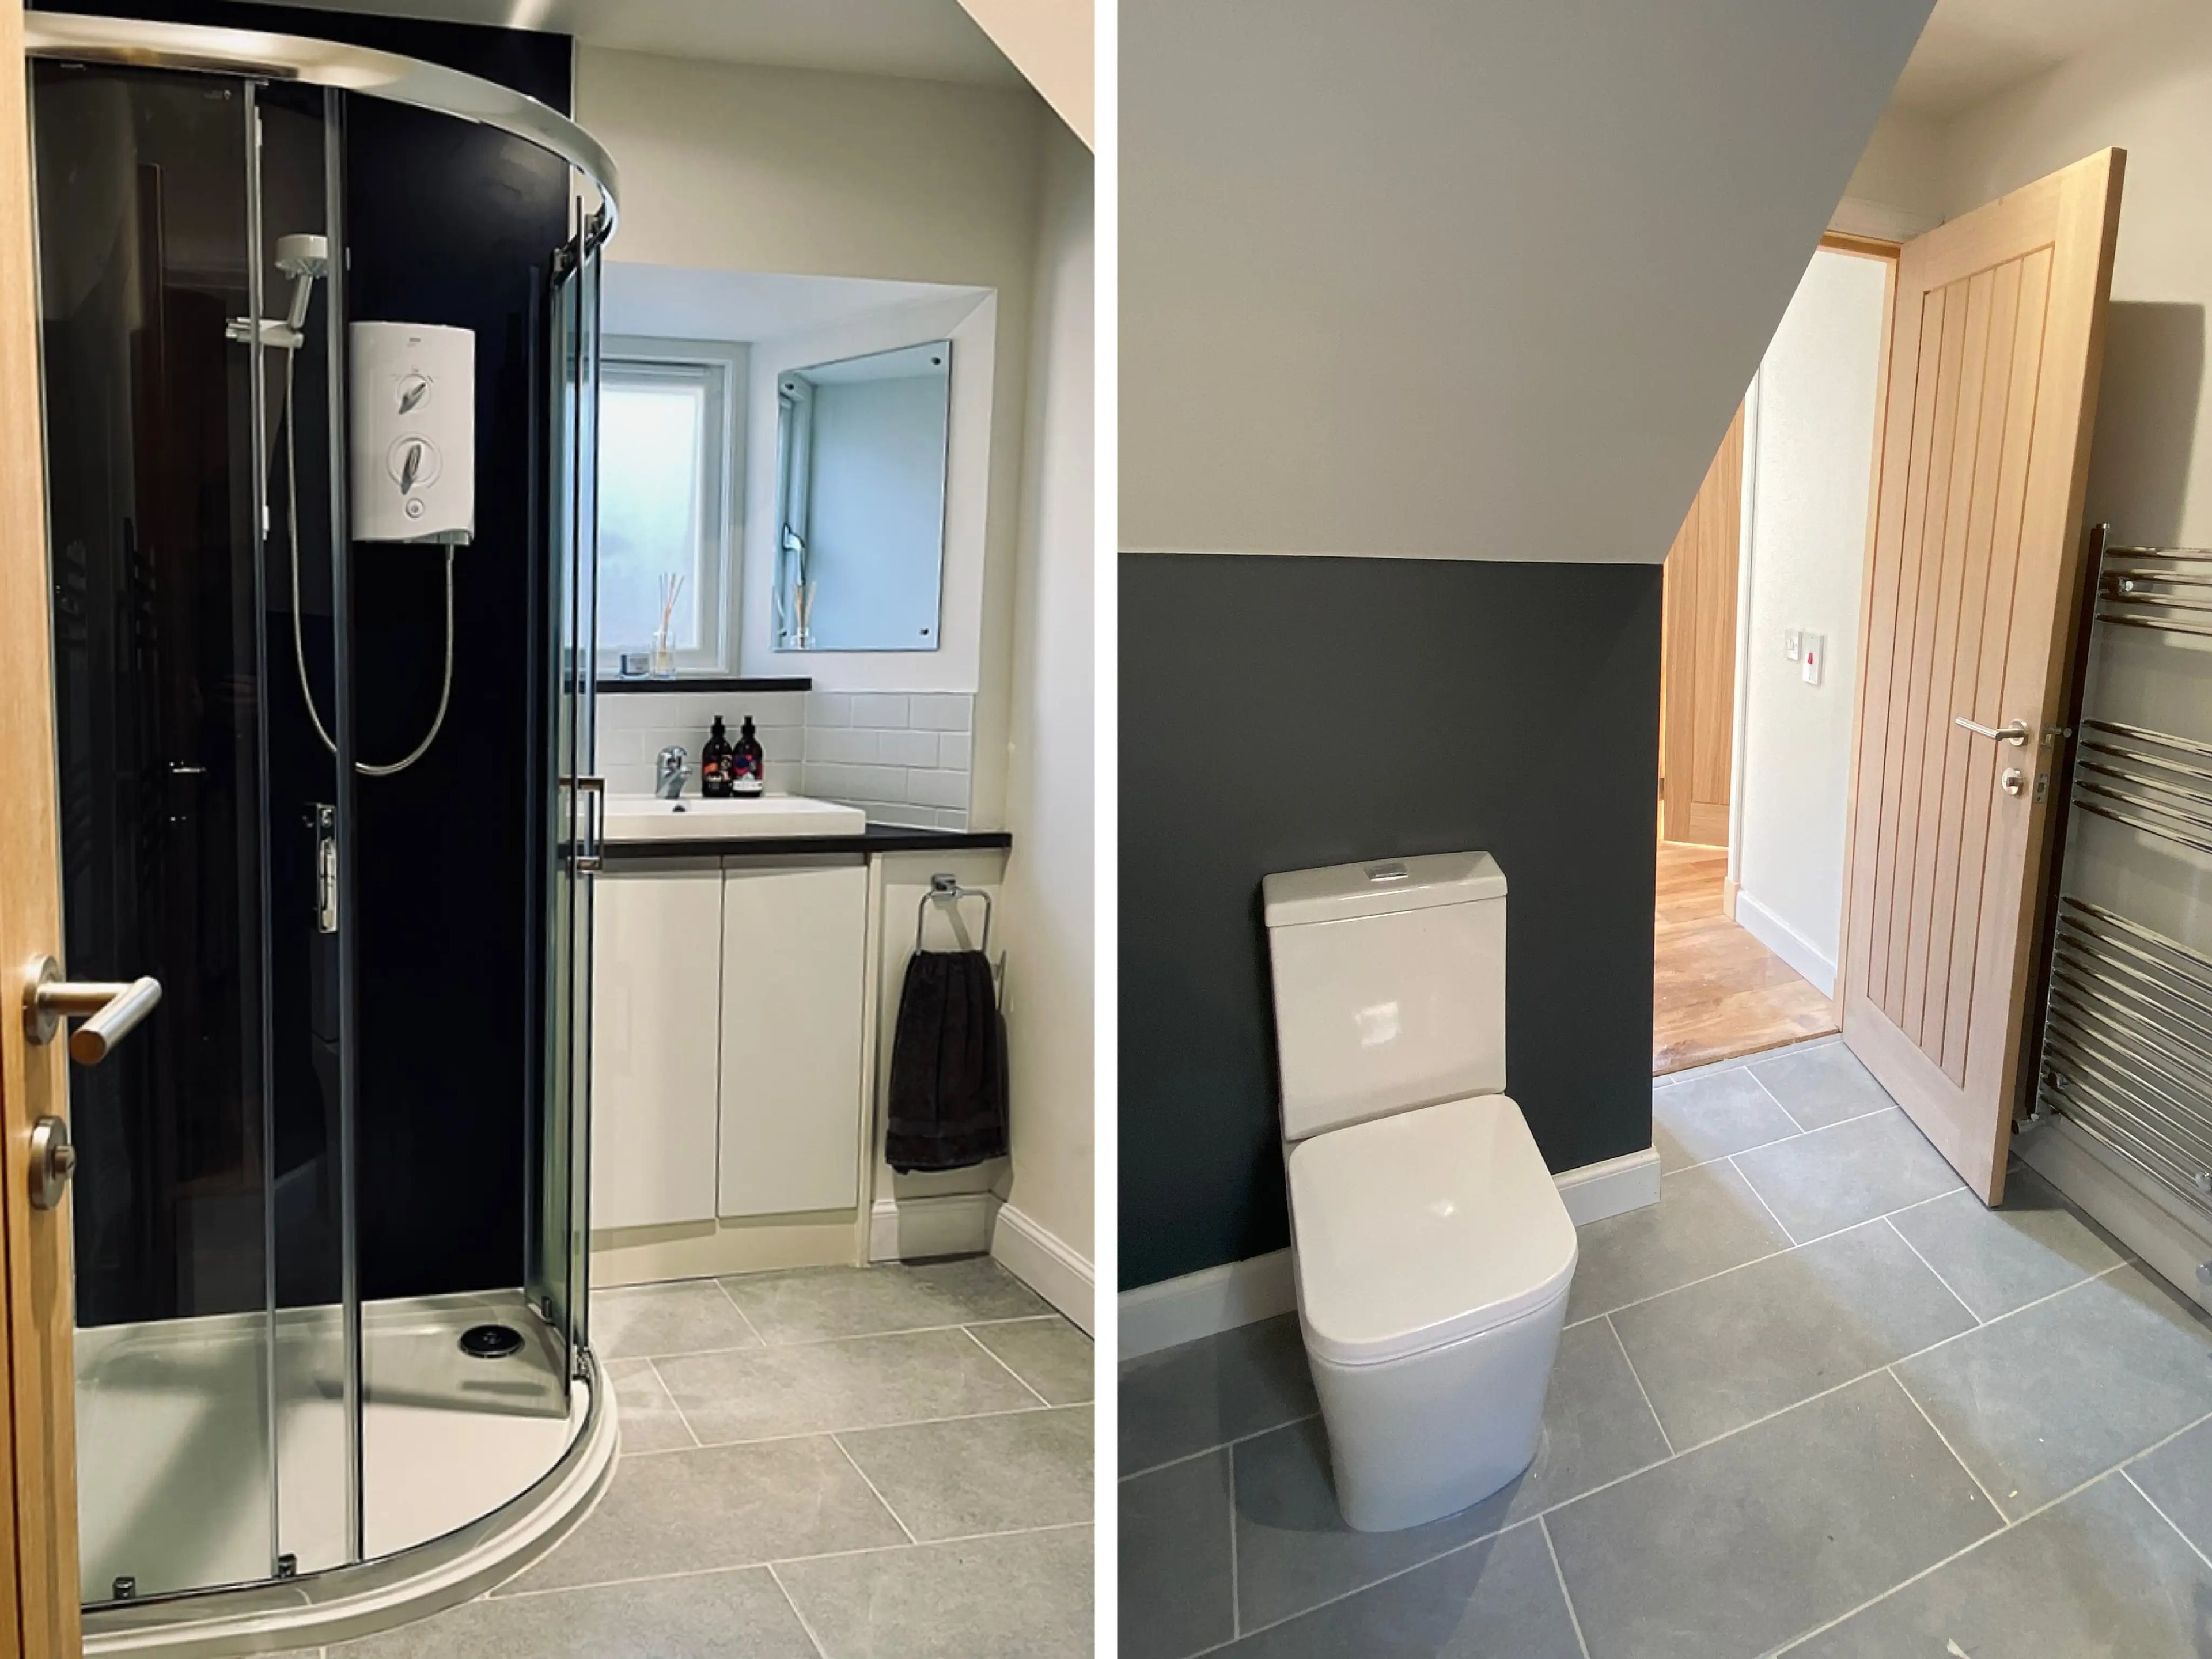 A collage of two photos of the completed bathroom.